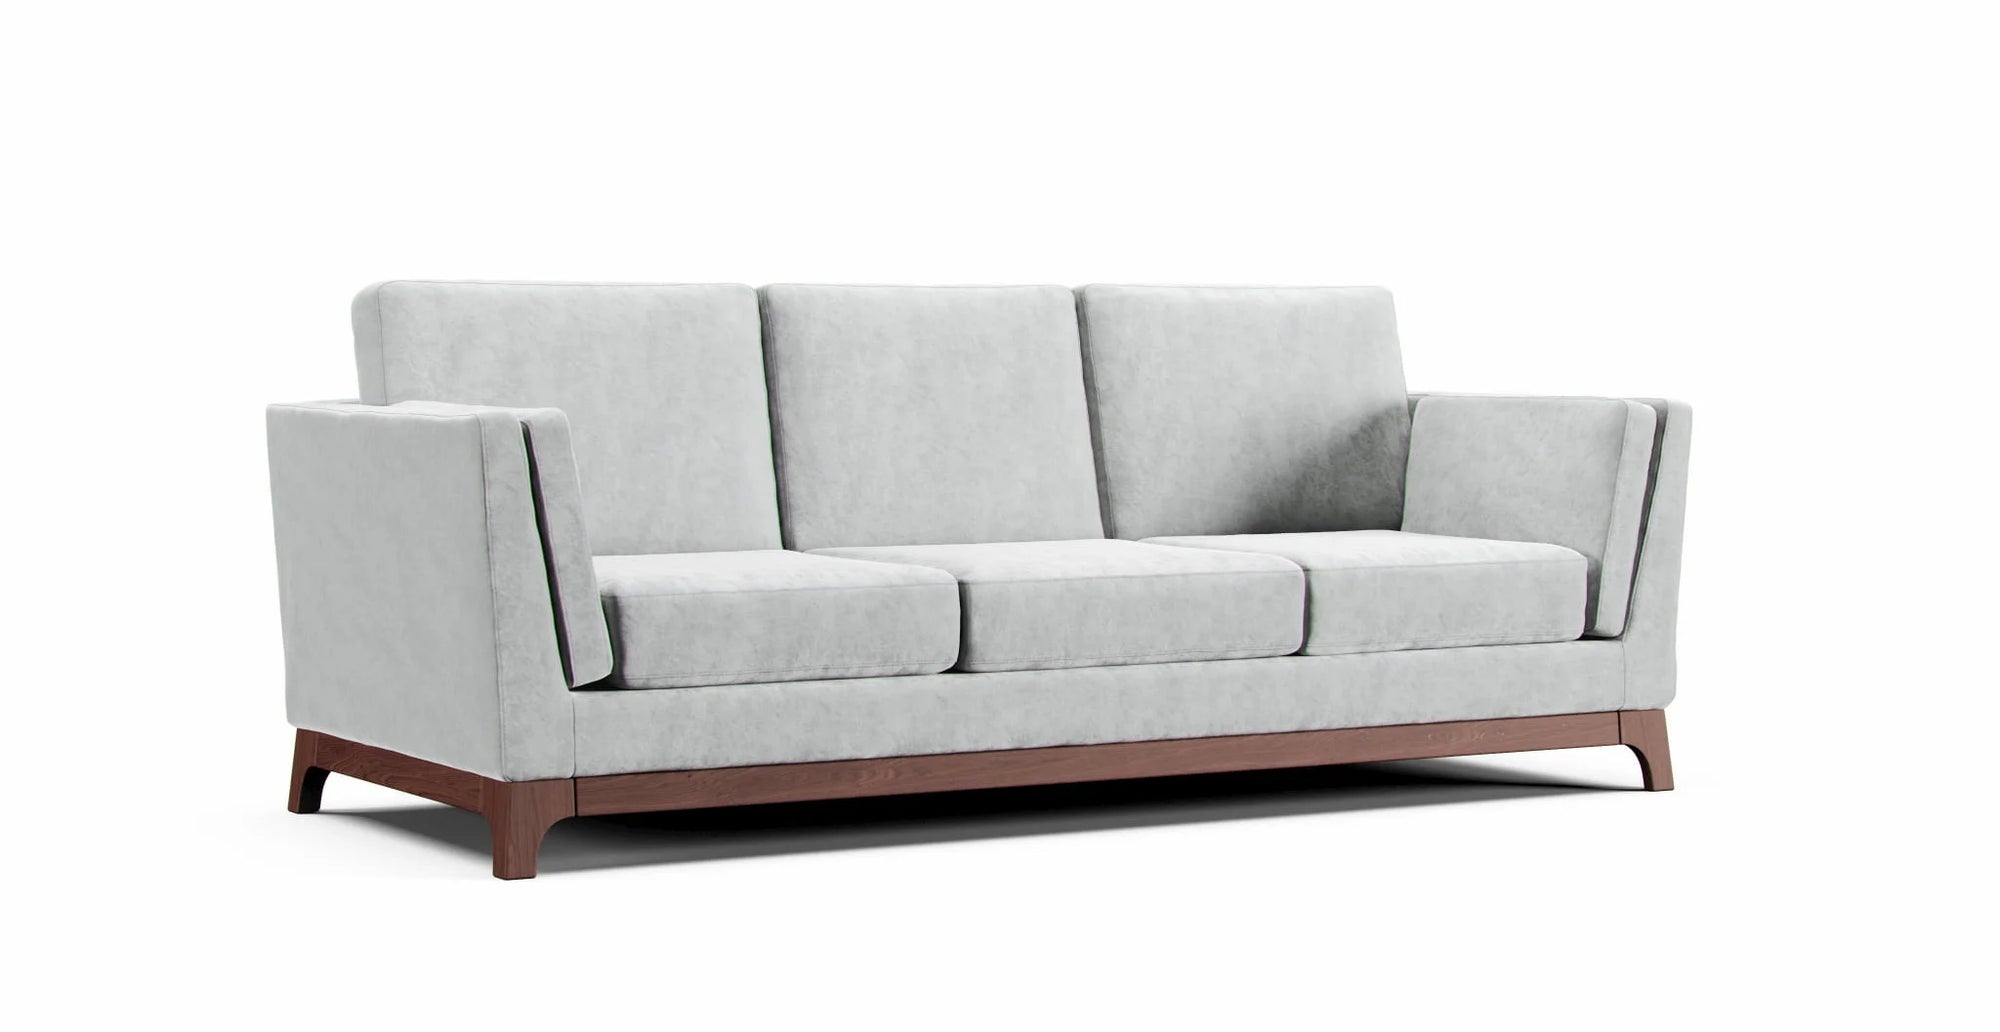 Article Ceni sofa with scratch-resistant and easy-to-clean Claw-proof Velvet pebble slipcover